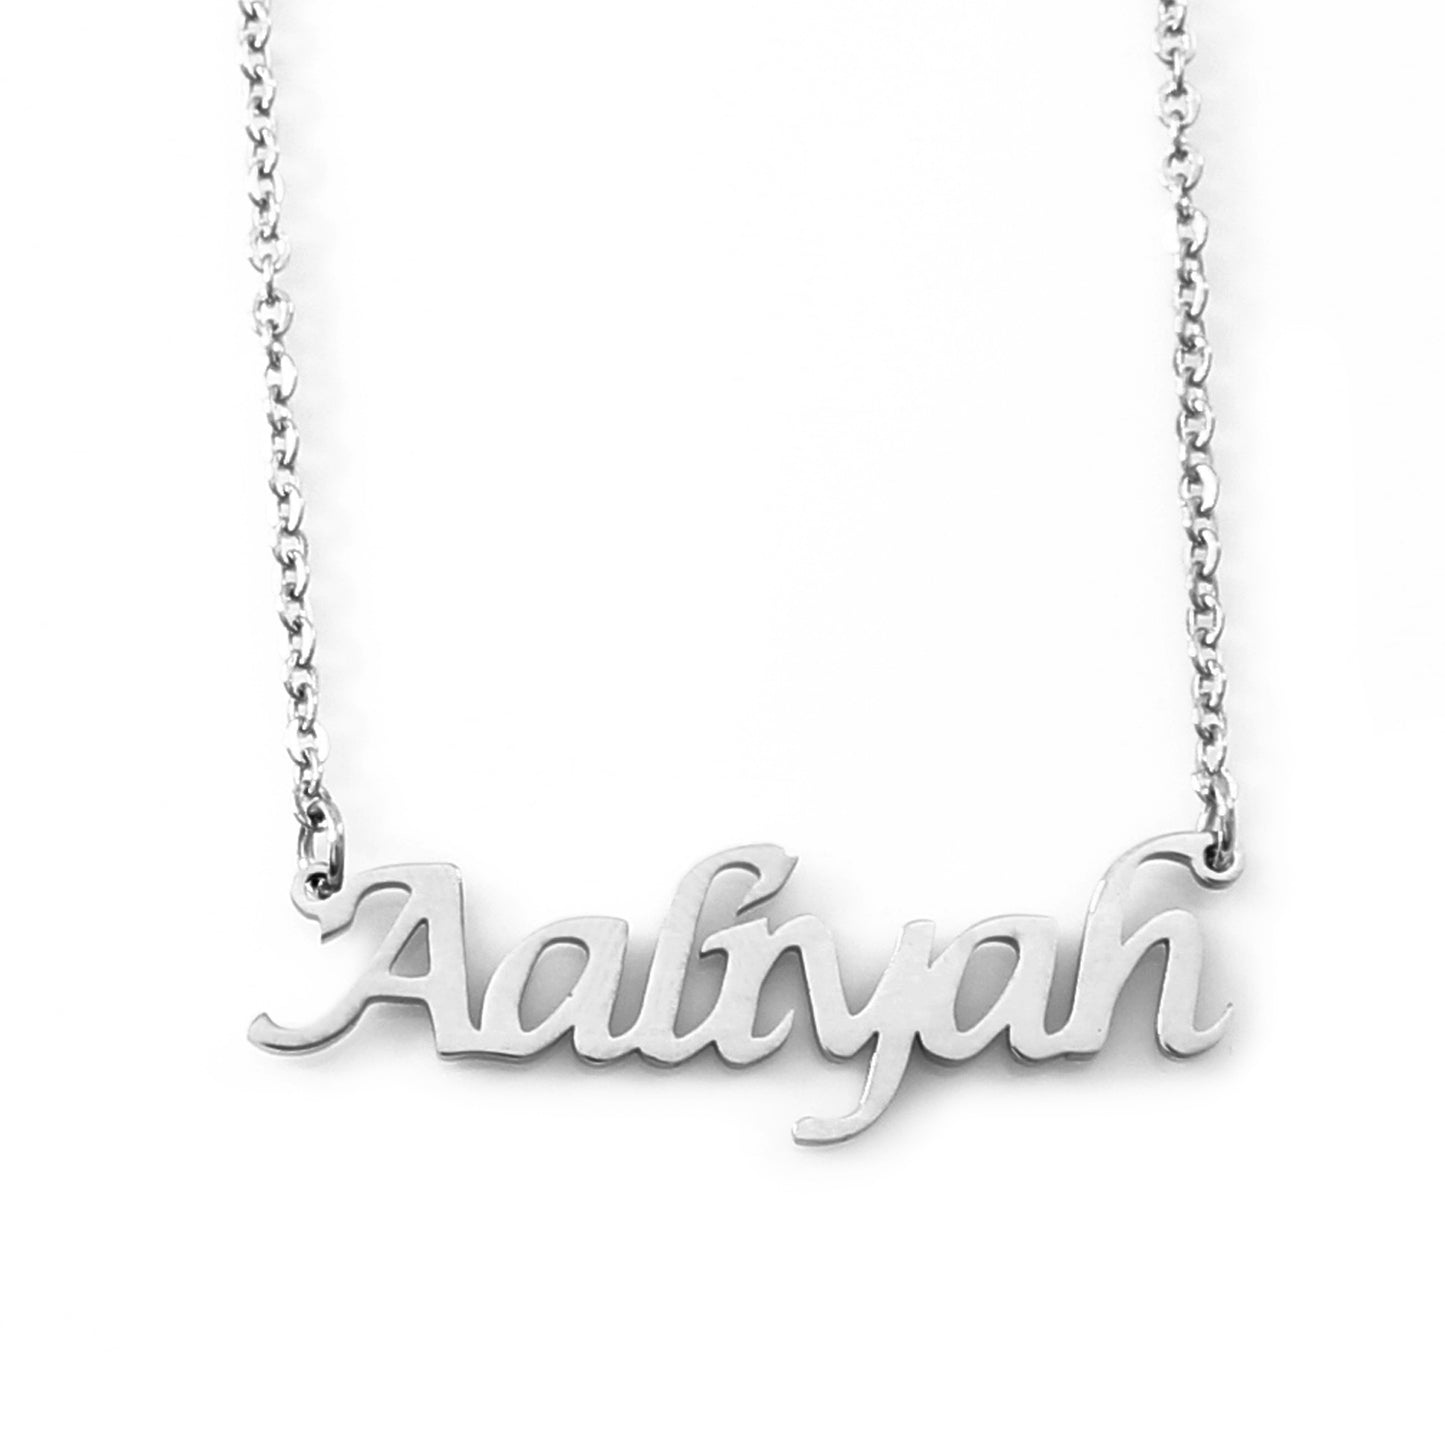 Aaliyah Name Necklace